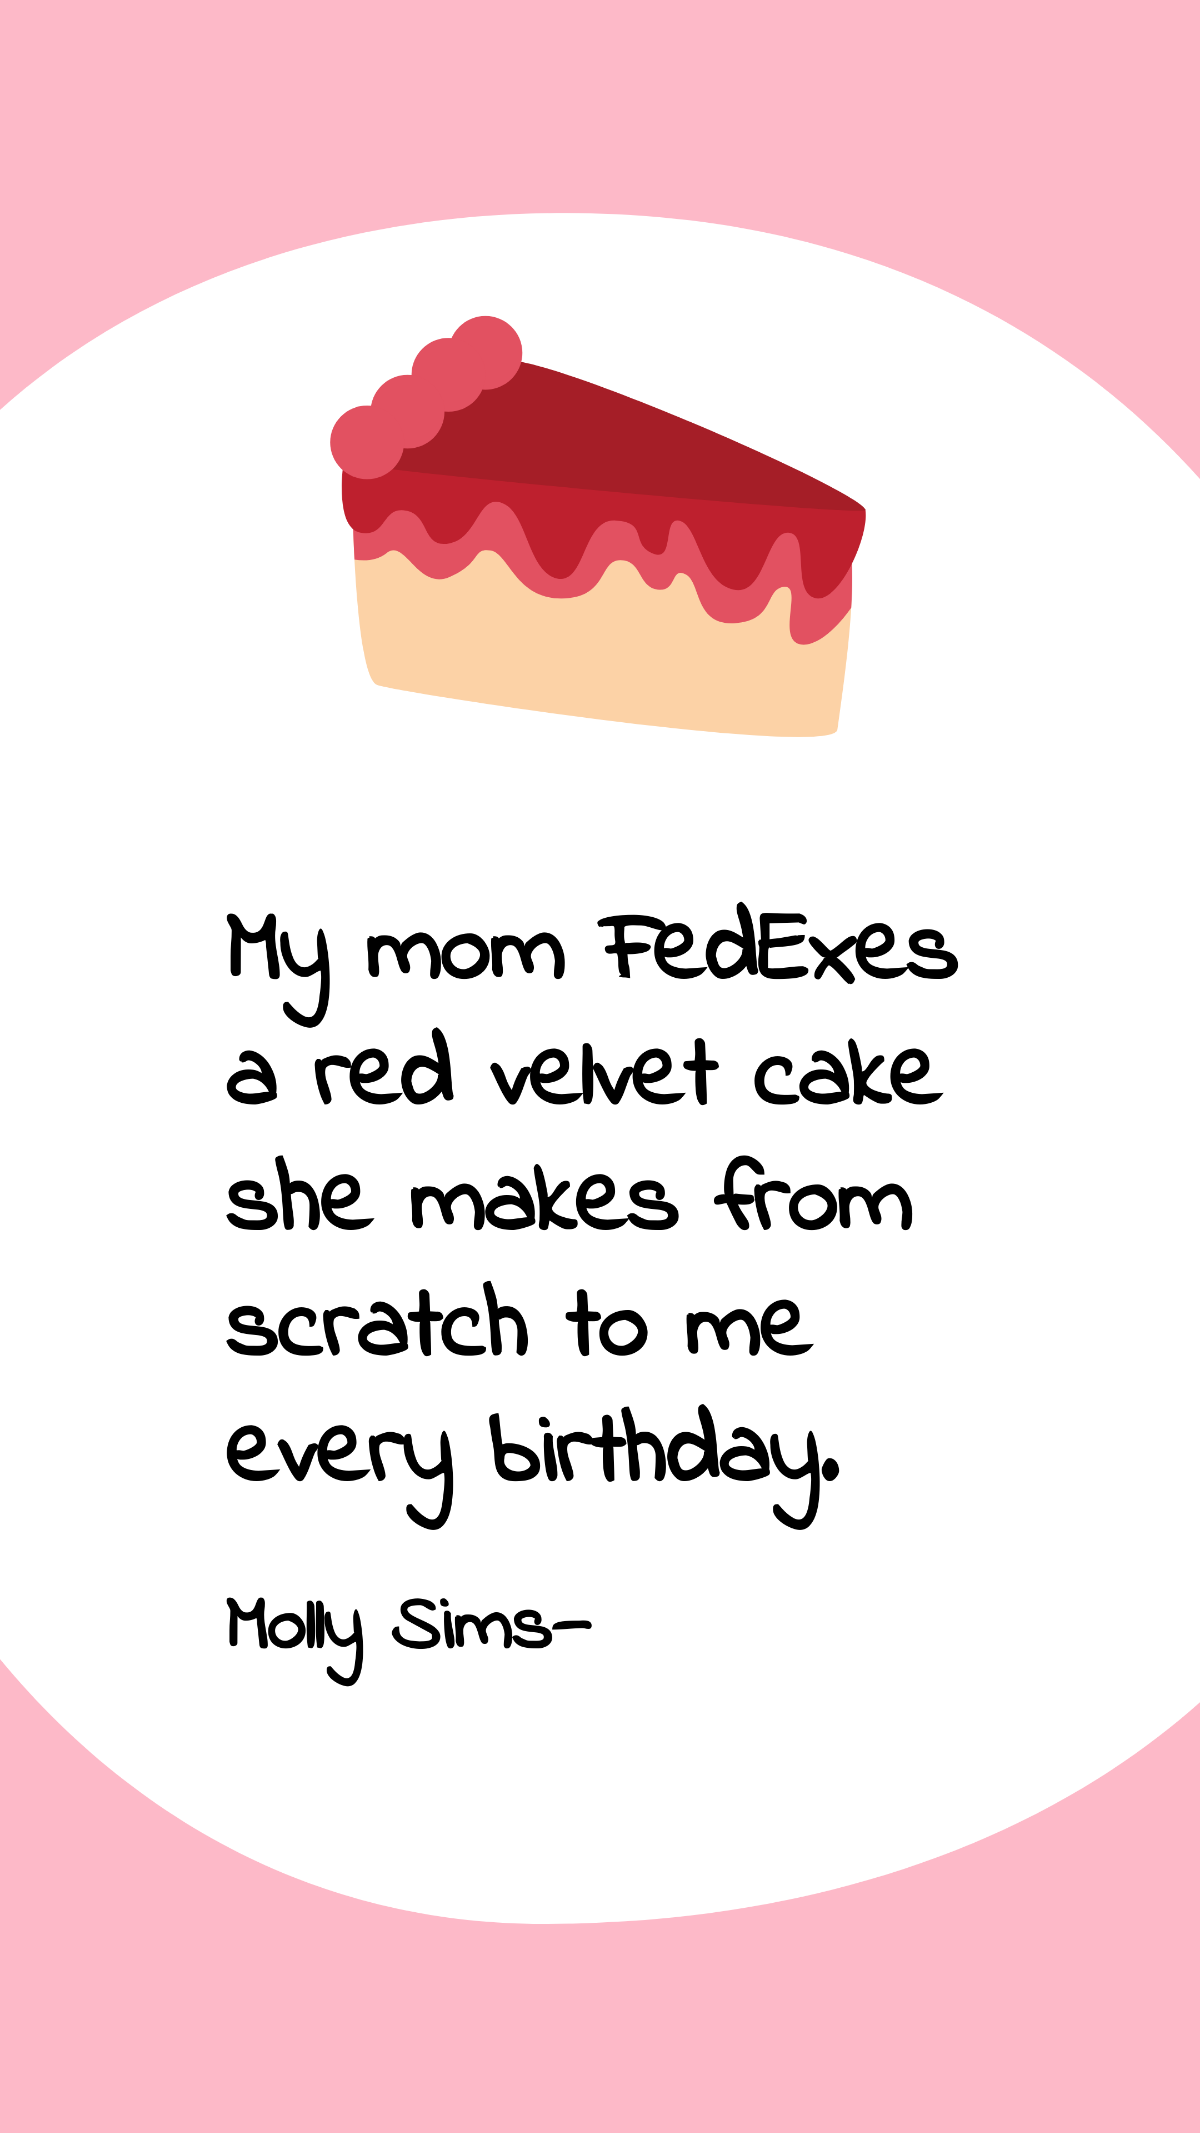 Molly Sims - My mom FedExes a red velvet cake she makes from scratch to me every birthday. Template